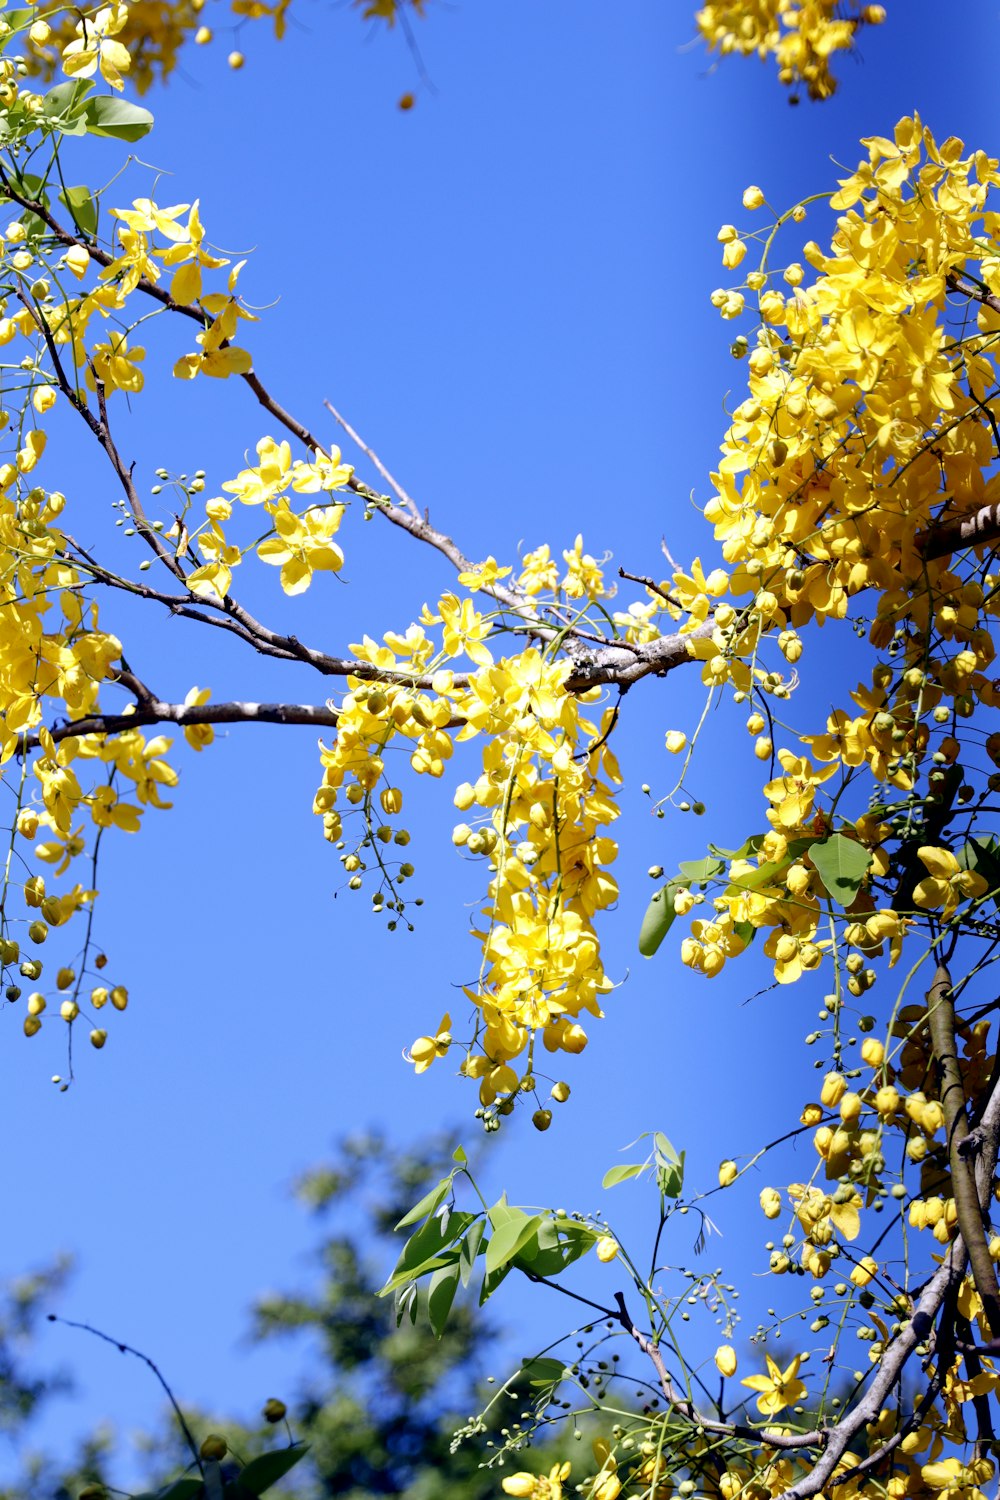 yellow flowers are blooming on the branches of a tree